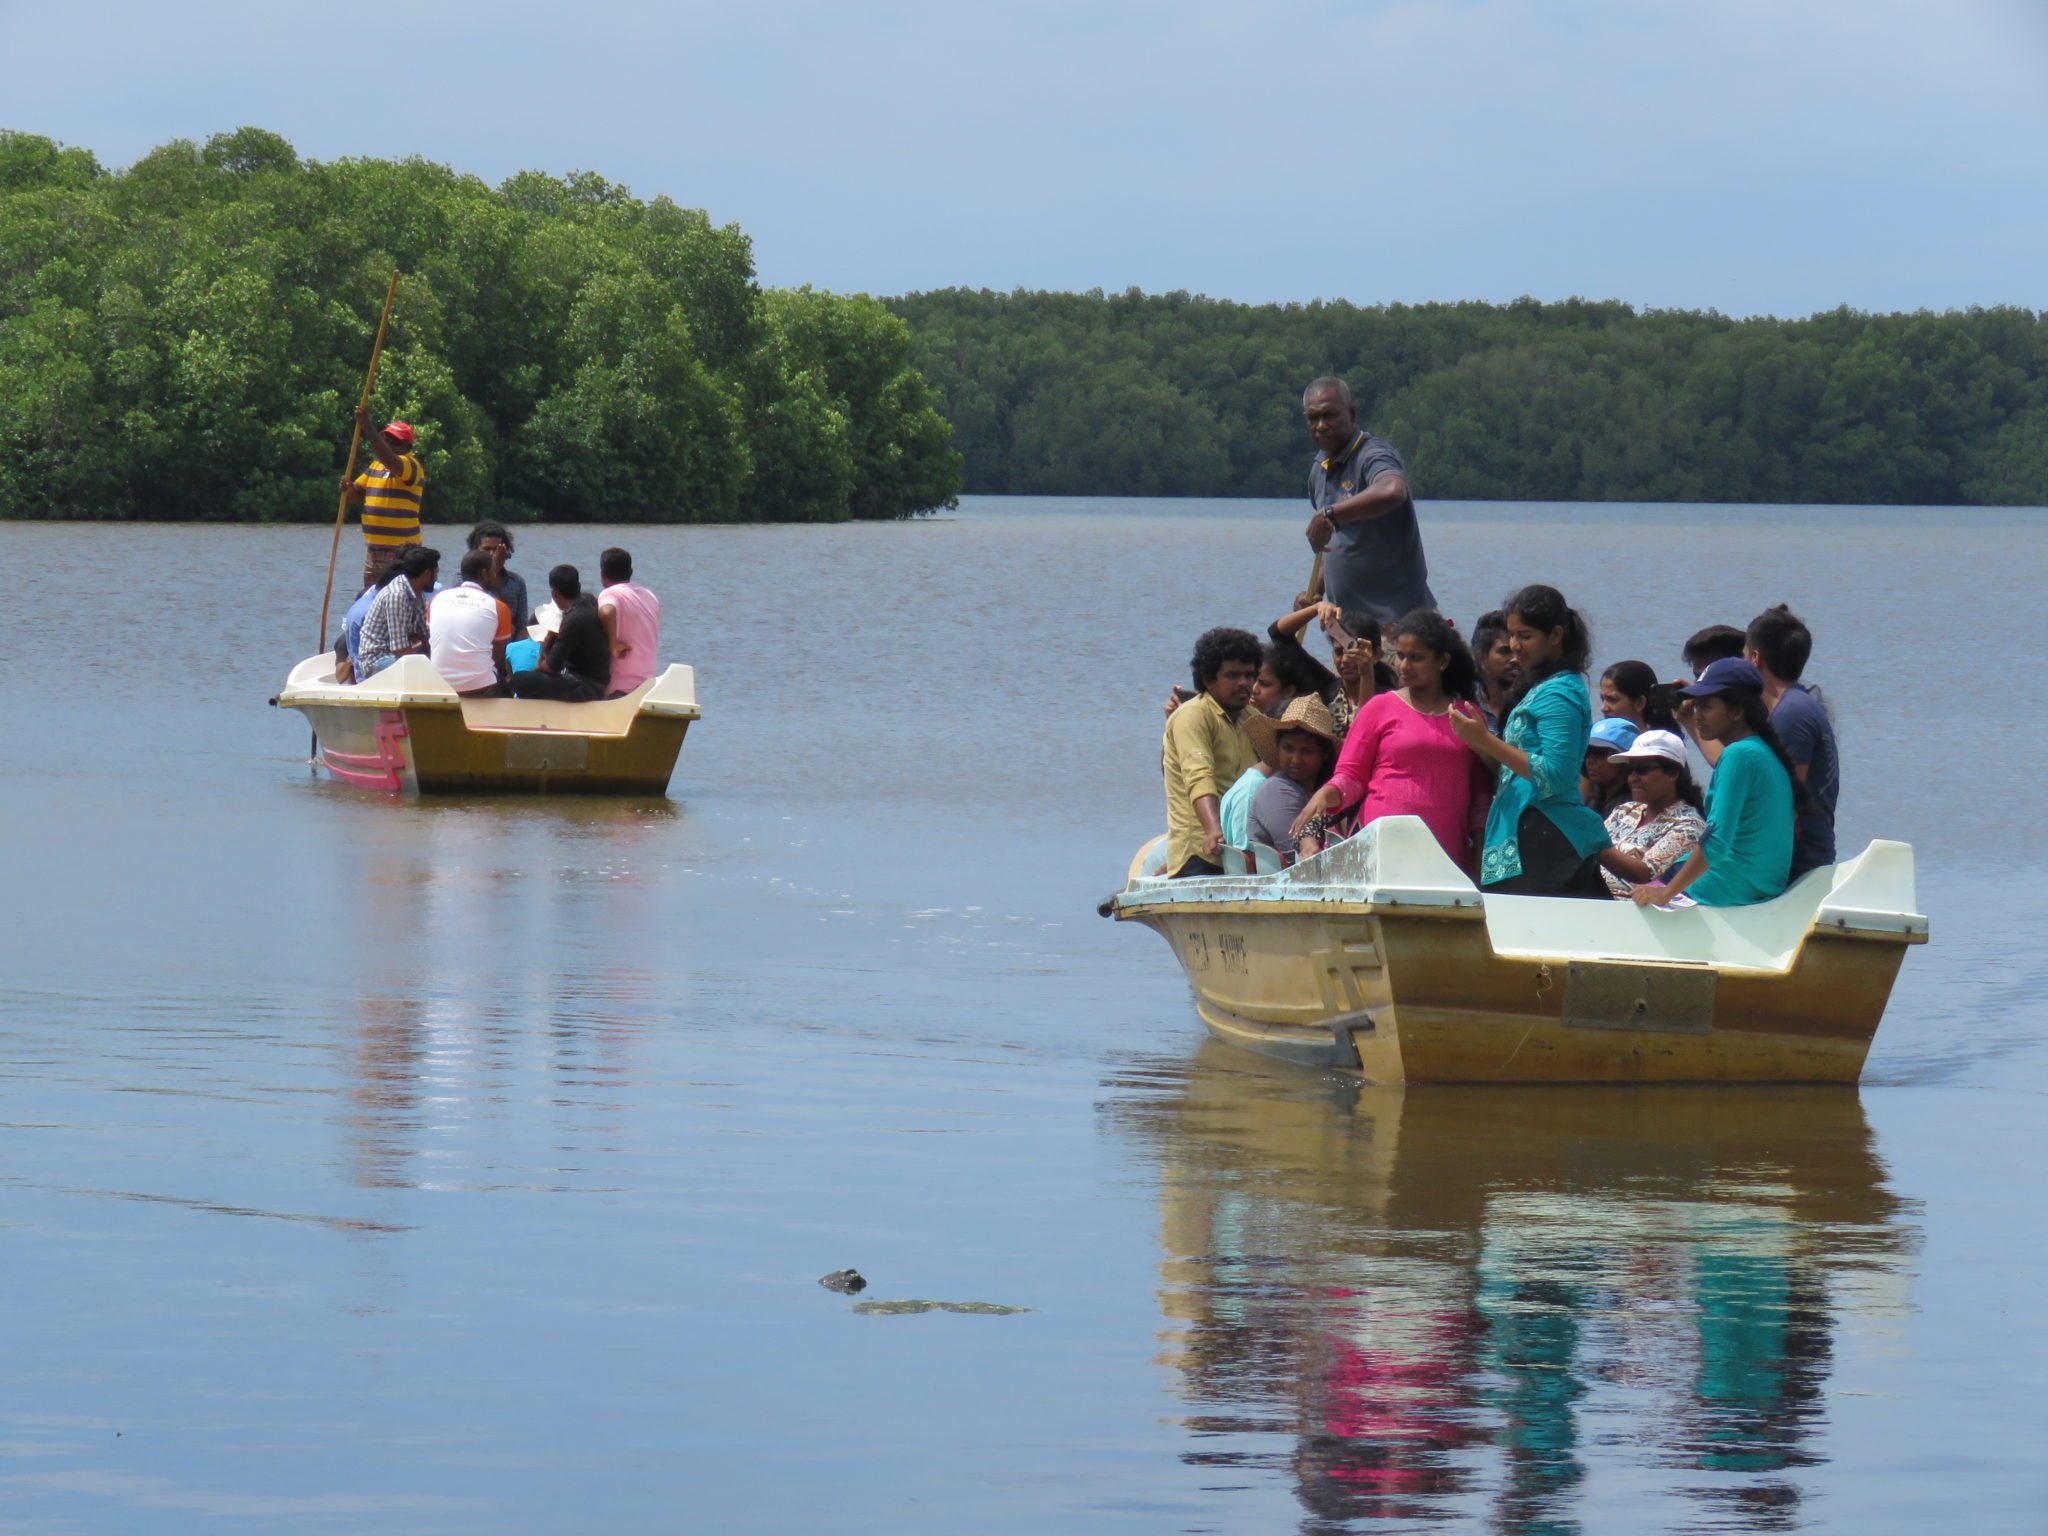 Sudeesa personnel lead university students on a tour through mangroves